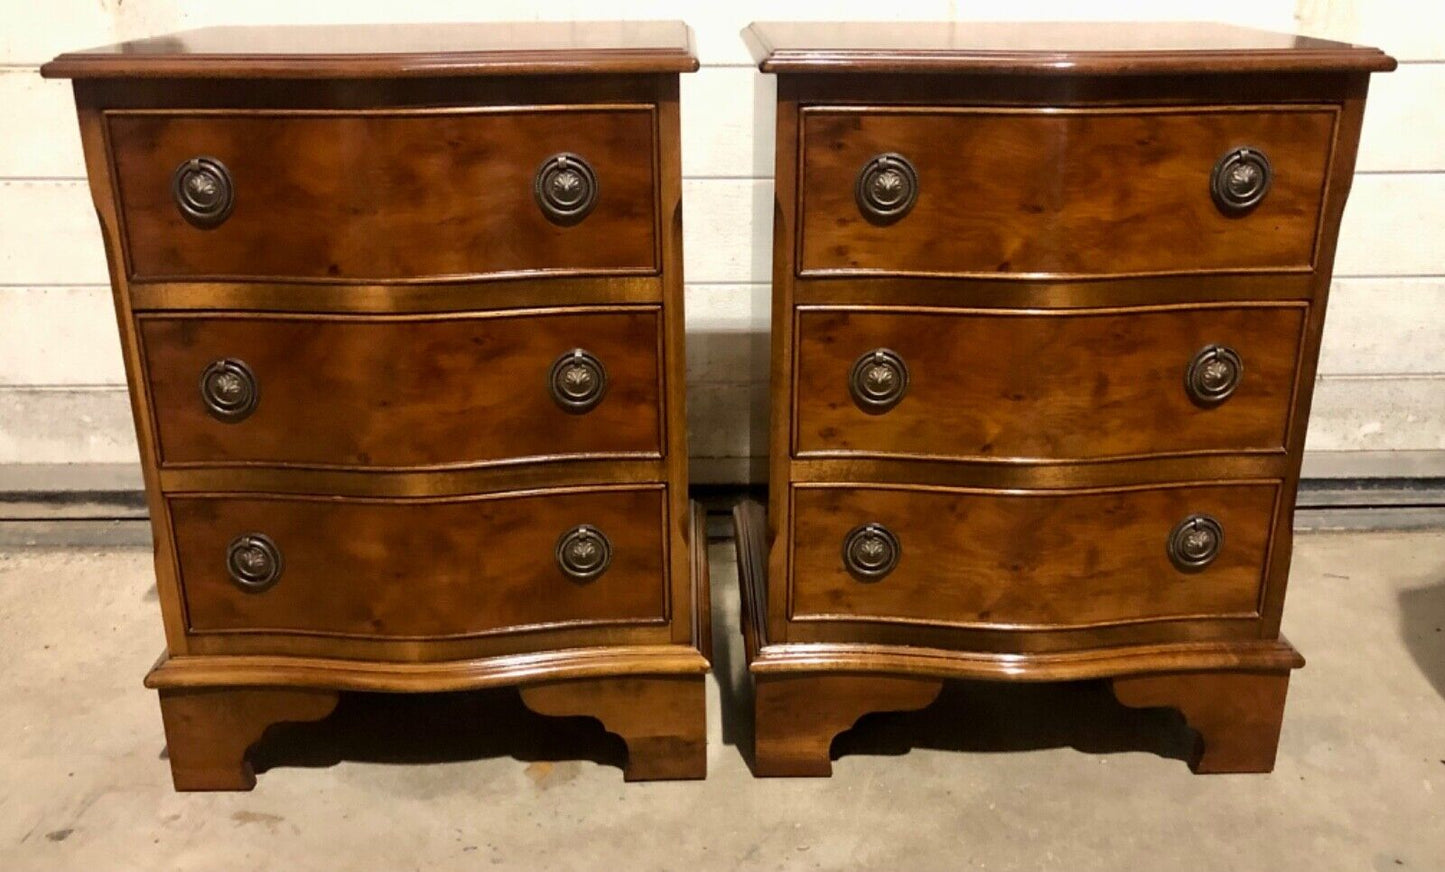 000781.....Handsome Pair Of Vintage Yew Bedside Chests / Bedside Tables( sold )